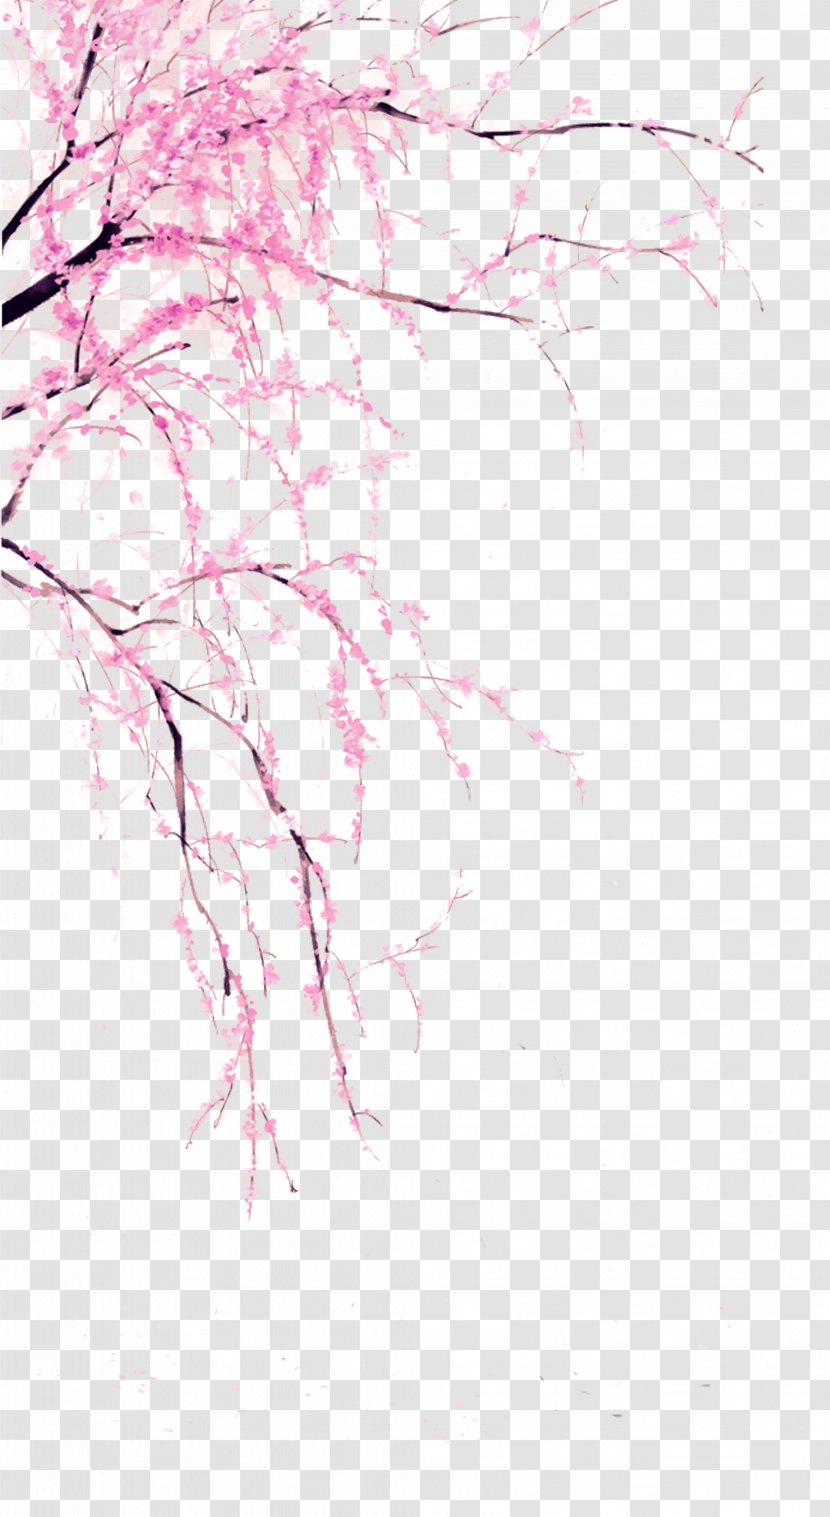 Download Clip Art - Pink - Peach Branches Down The Decorative Pattern Transparent PNG